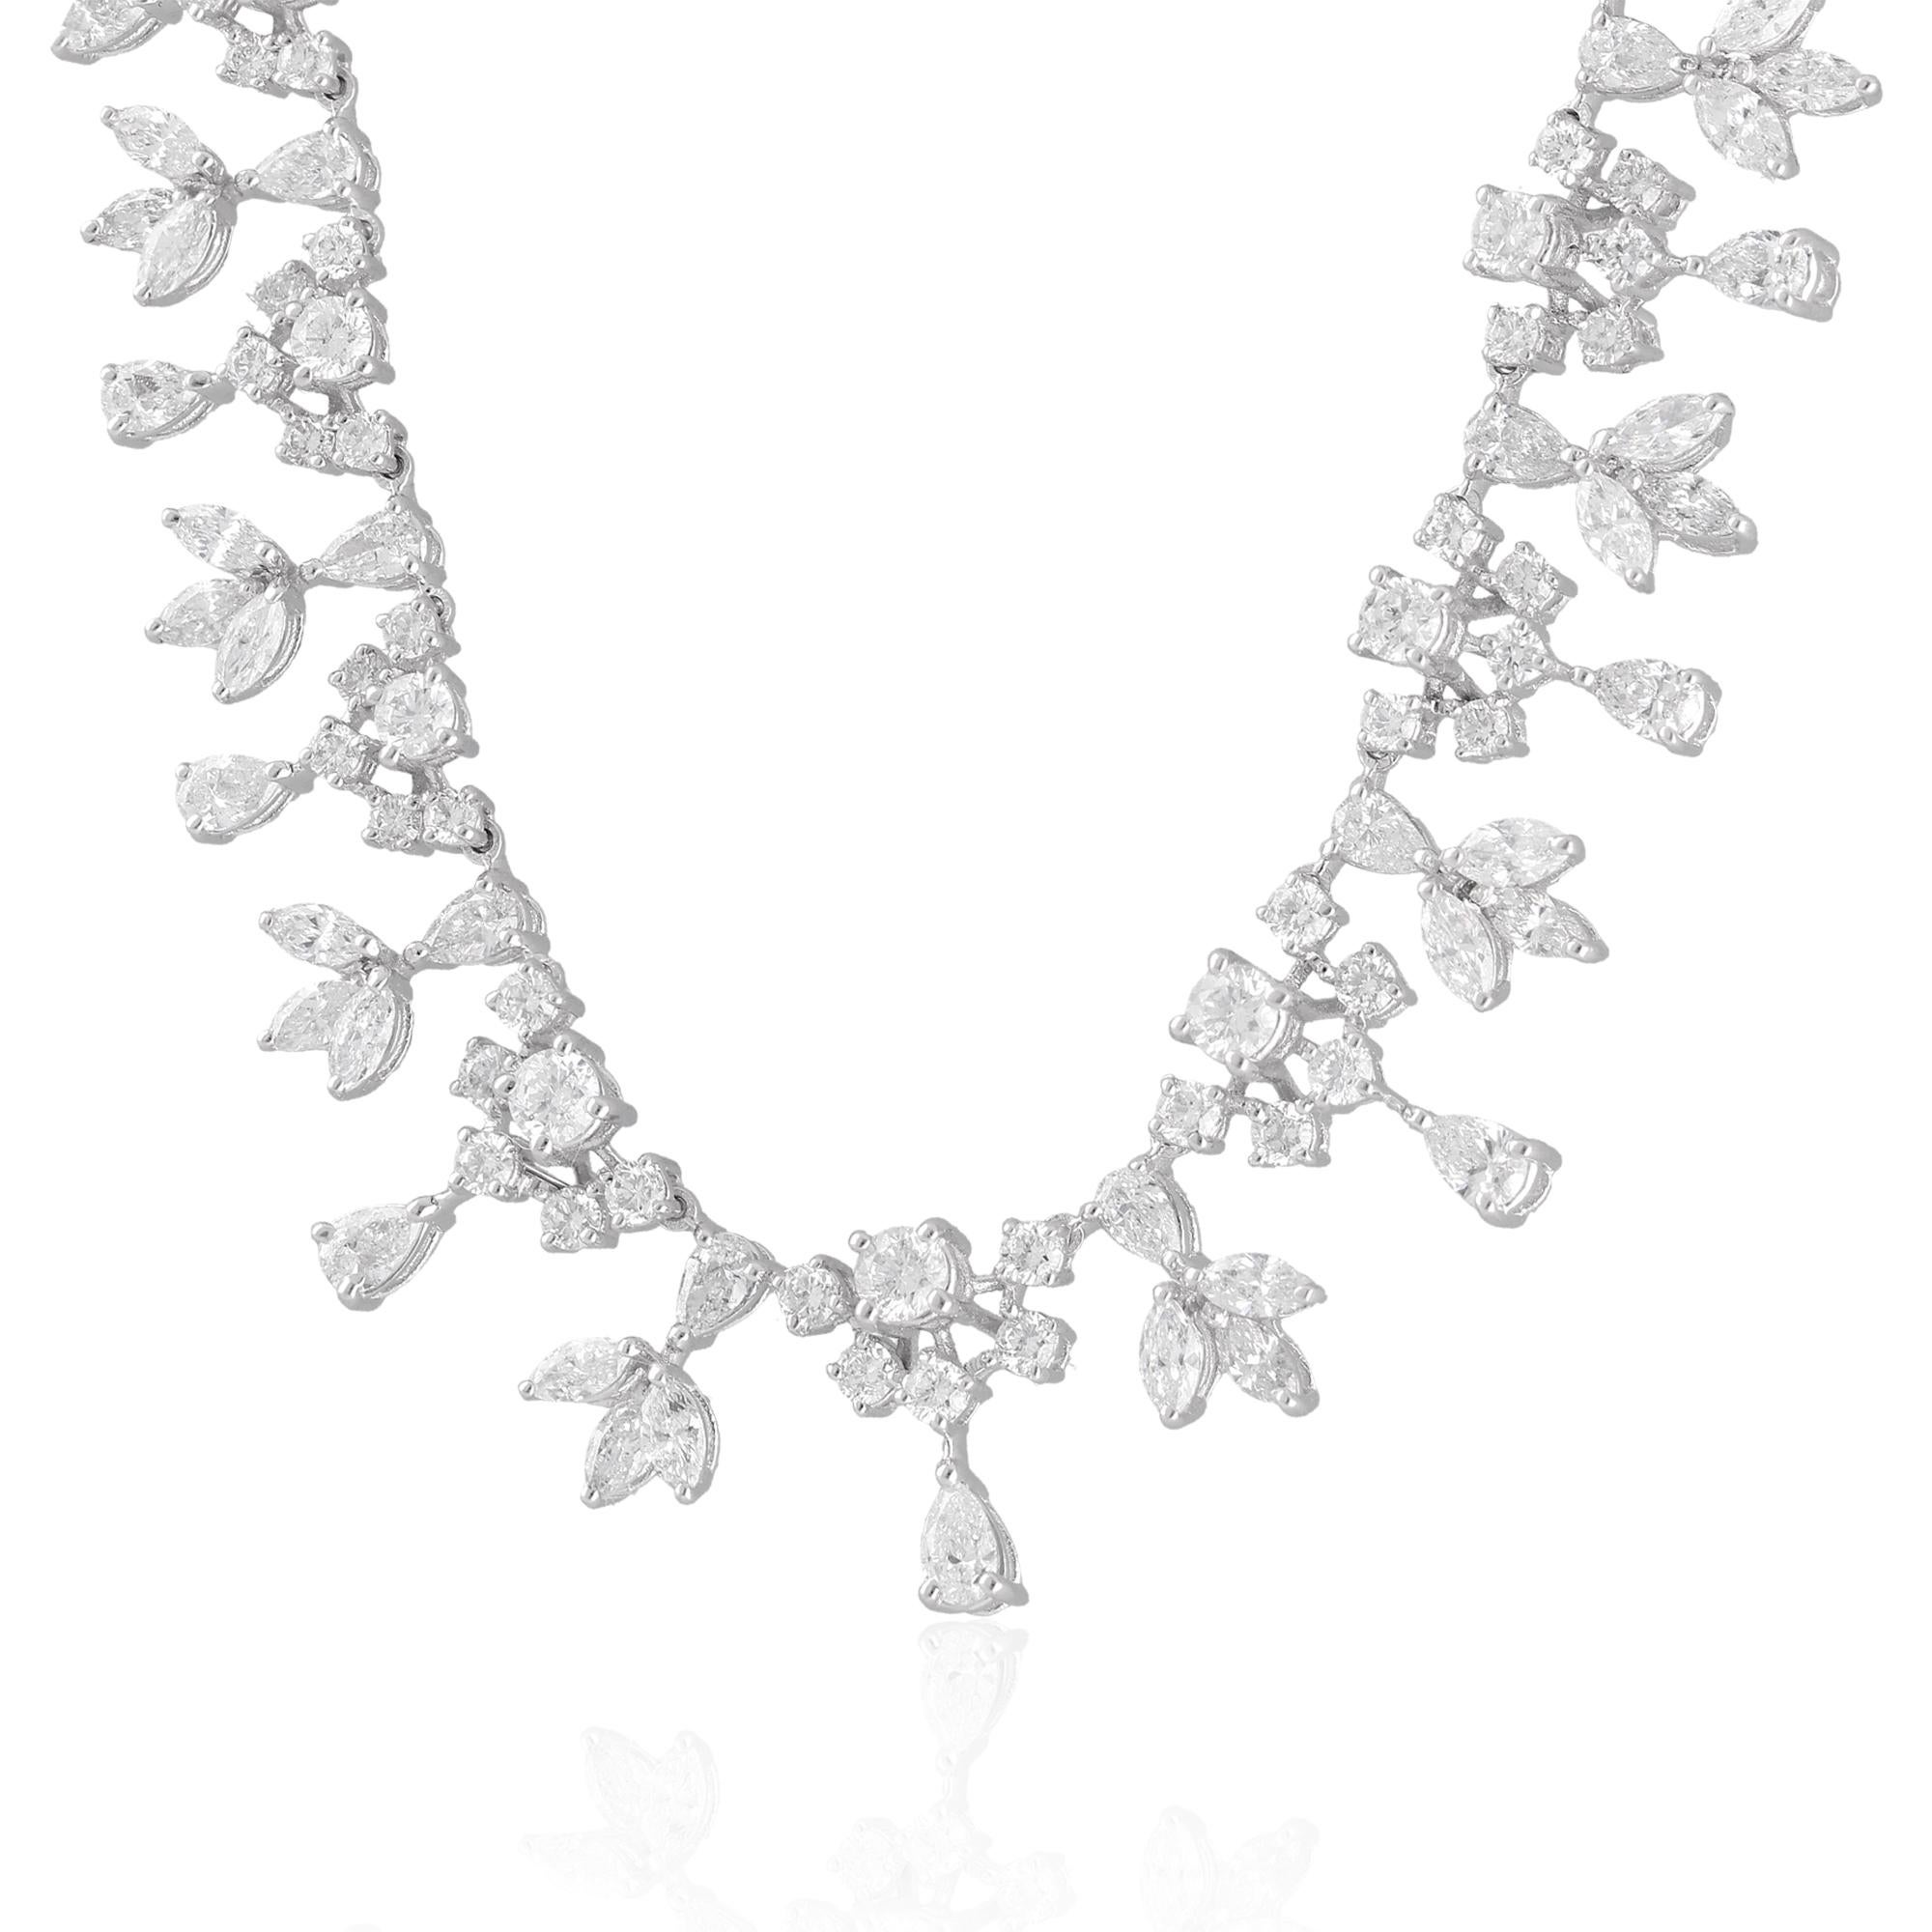 It sounds like we're describing a necklace made from 14 karat white gold, featuring a combination of round, pear-shaped, and marquise diamonds with a total weight of 8.20 carats. This necklace is categorized as fine jewelry due to the use of